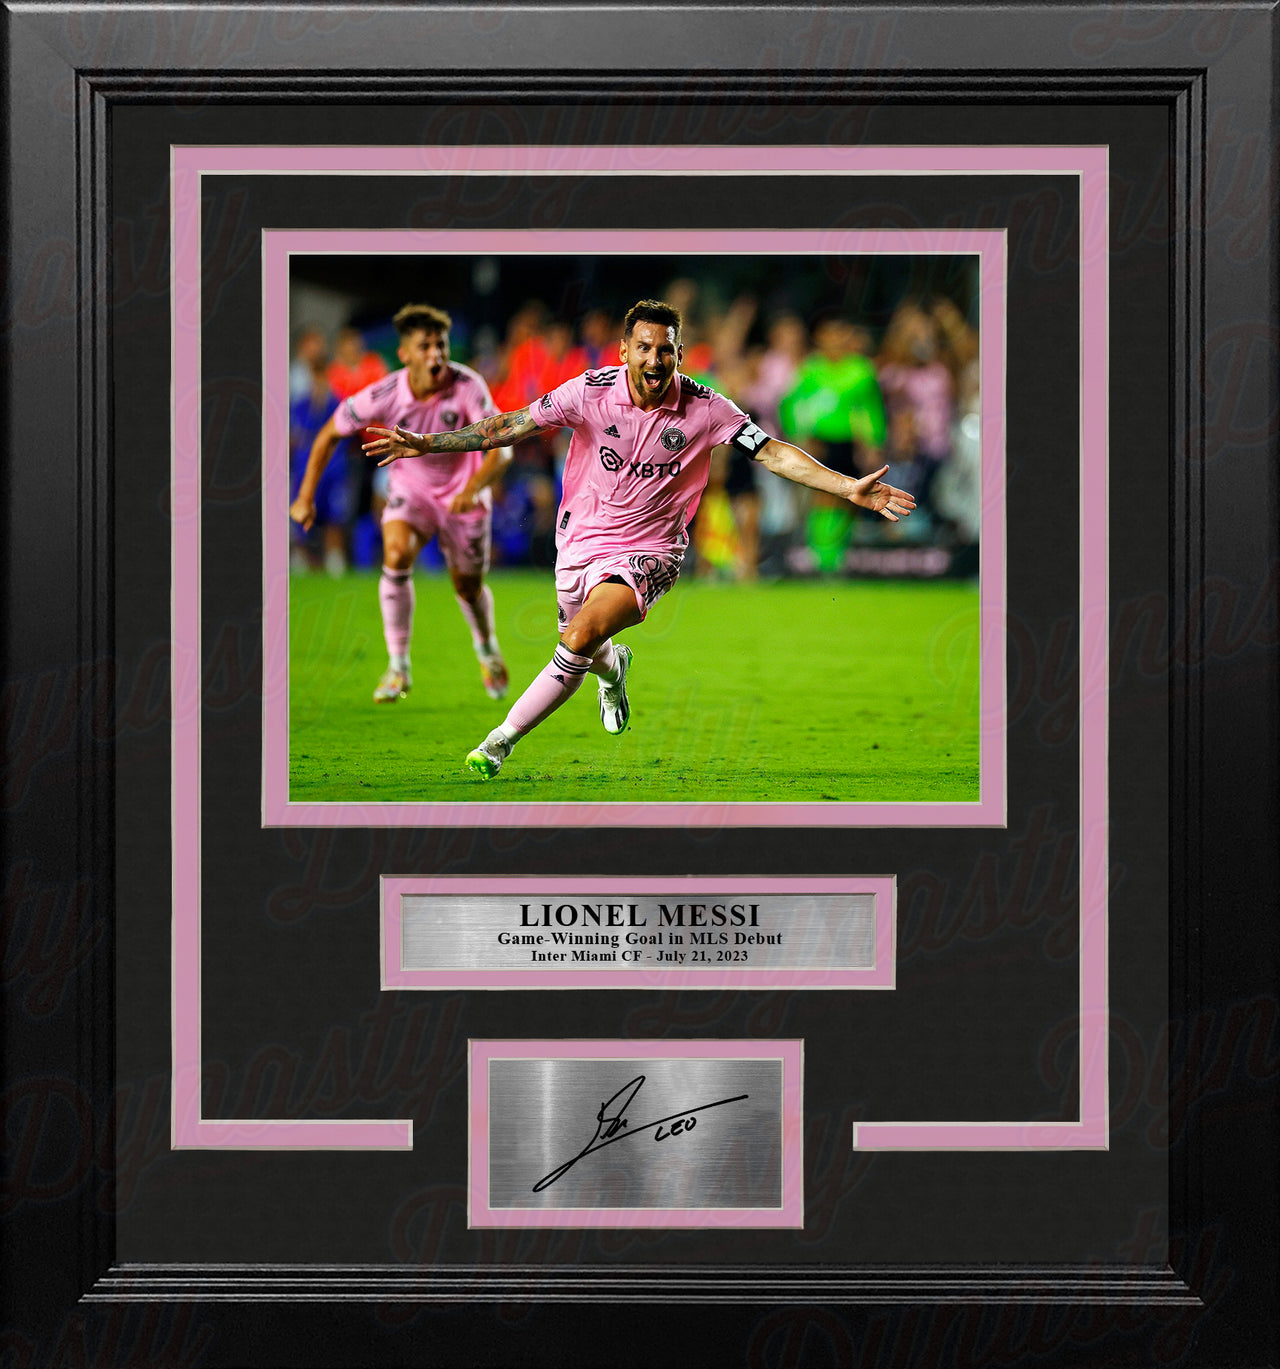 Lionel Messi Game-Winning Goal in MLS Debut Inter Miami CF 8x10 Framed Photo with Engraved Autograph